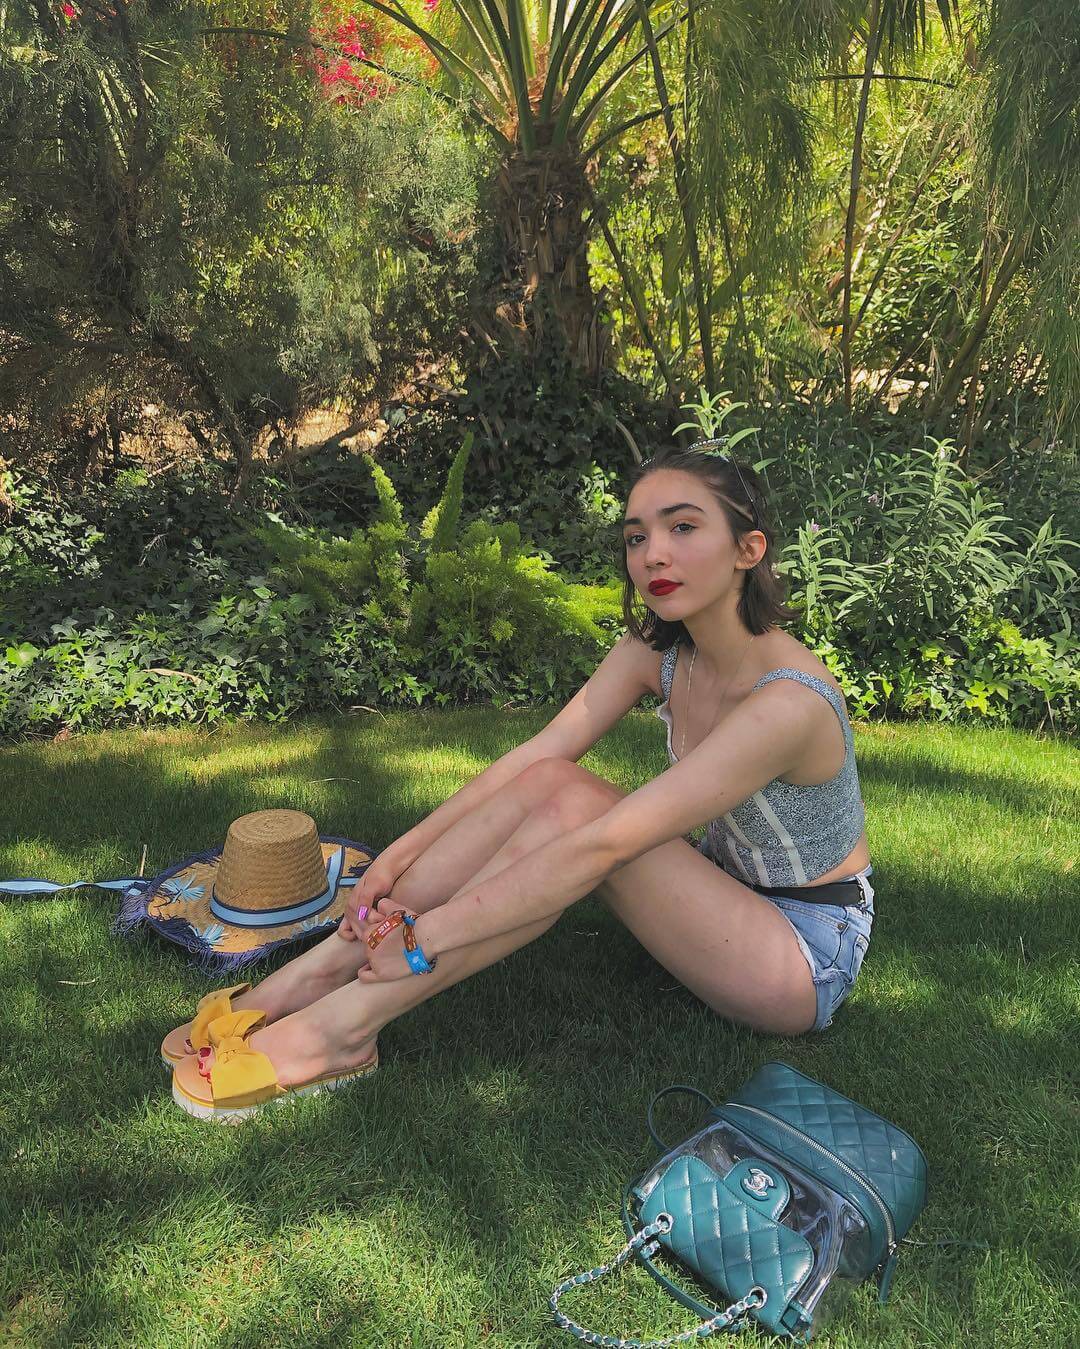 60+ Hot Pictures Of Rowan Blanchard Which Are Here To Make Your Day A Win | Best Of Comic Books